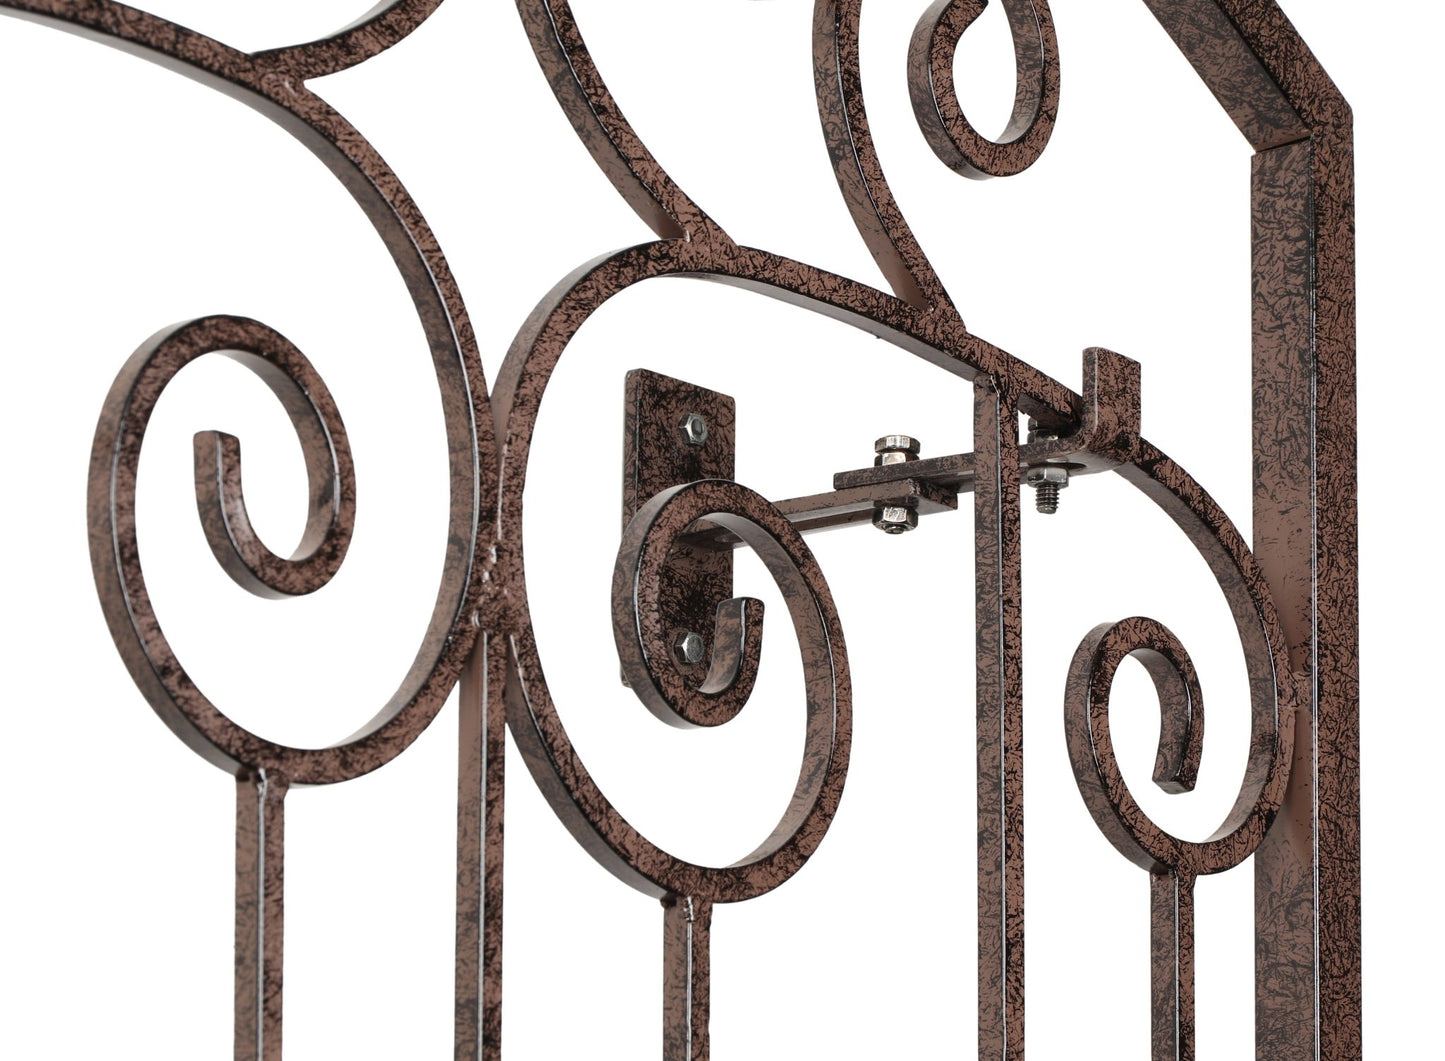 H Potter 8 Foot Wrought Iron Garden Trellis Metal Wall Screen with Wall Mounting Brackets - H Potter